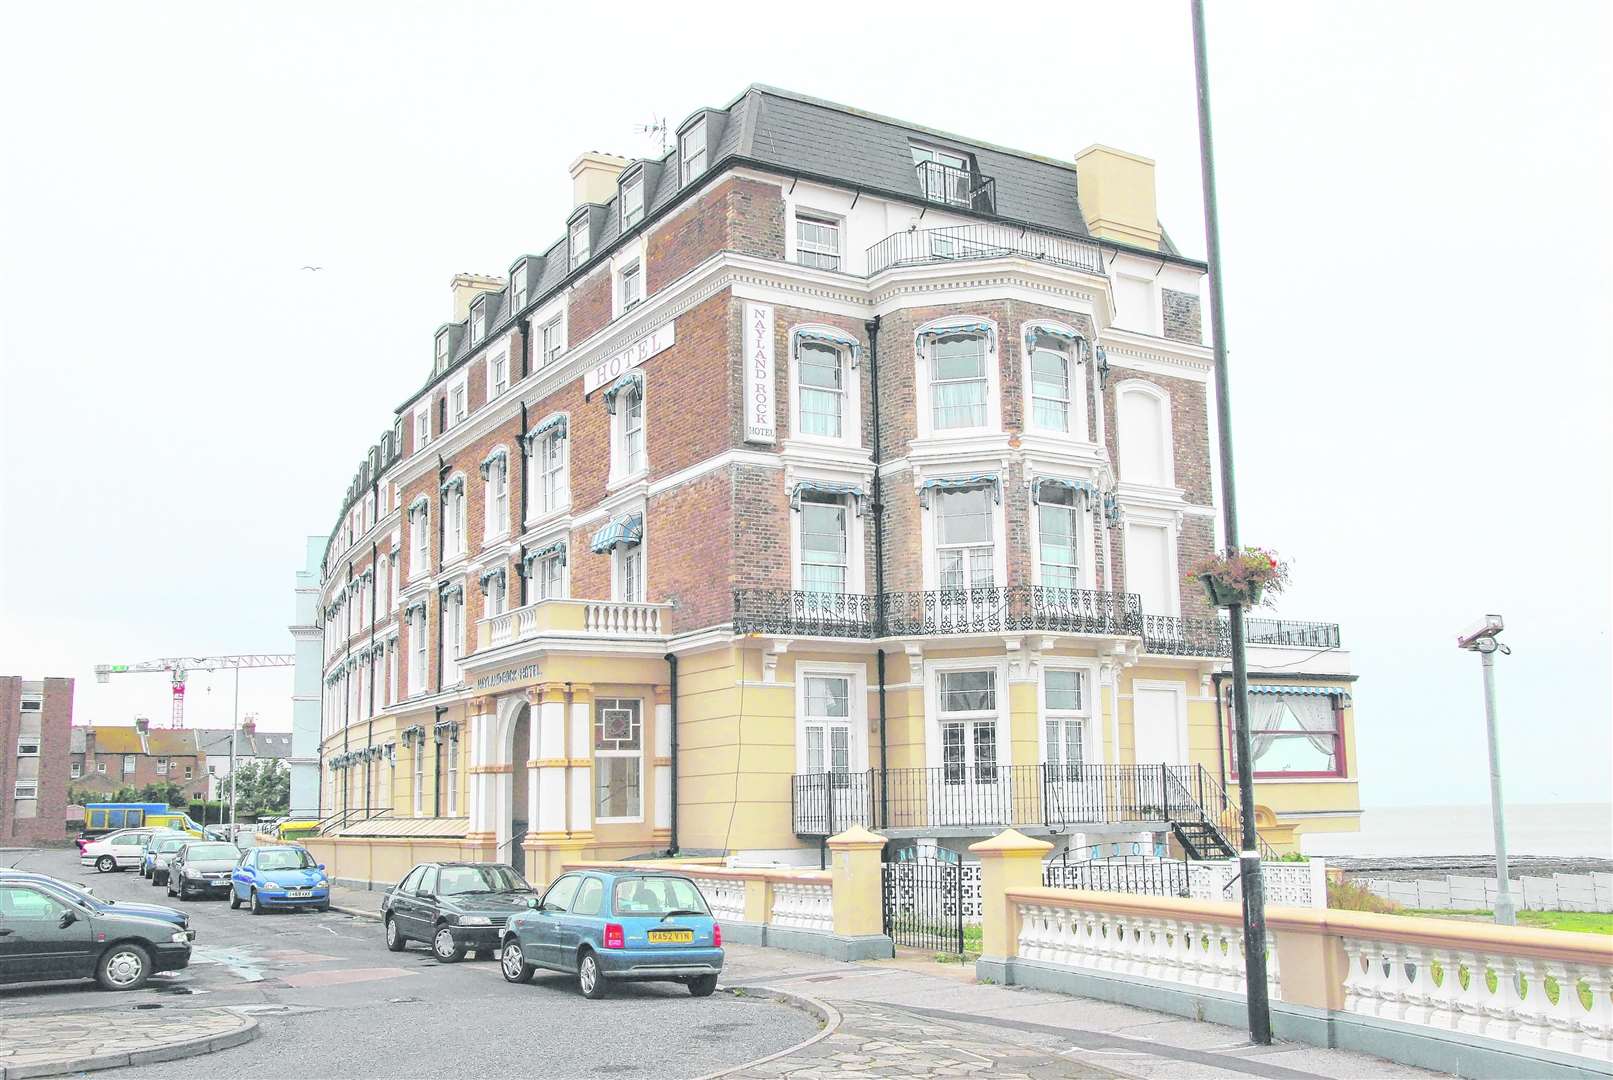 The Nayland Rock Hotel in Margate which hosted a Rolling Stones bash (sort of)